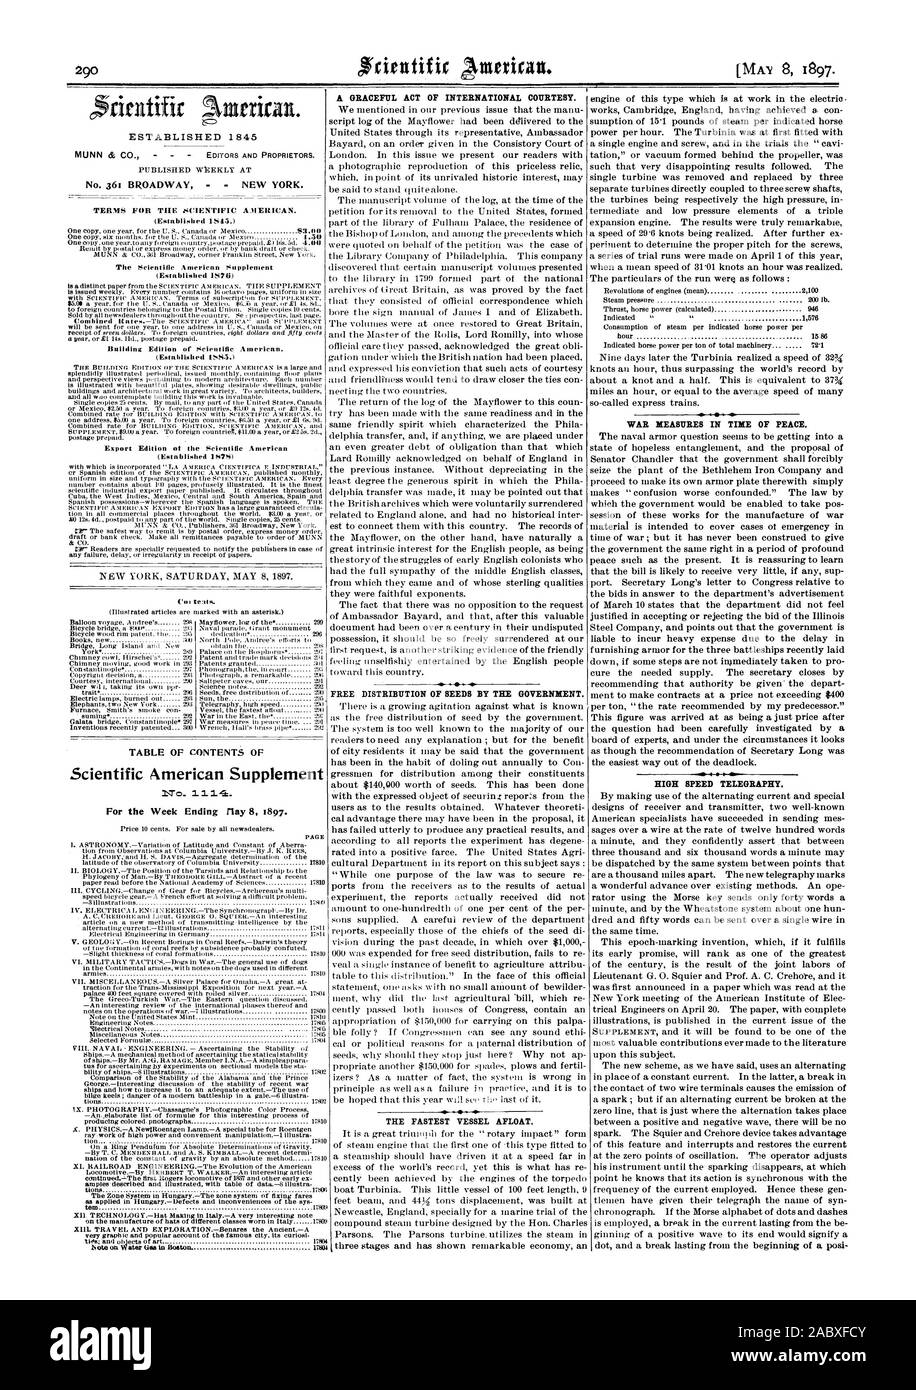 ESTABLISHED 1 845 NEW YORK SATURDAY MAY 8 1897. TABLE OF CONTENTS OF  Scientific American Supplement No. 1 1 14. PAGE FREE DISTRIBUTION OF SEEDS  BY THE GOVERNMENT. THE FASTEST VESSEL AFLOAT.